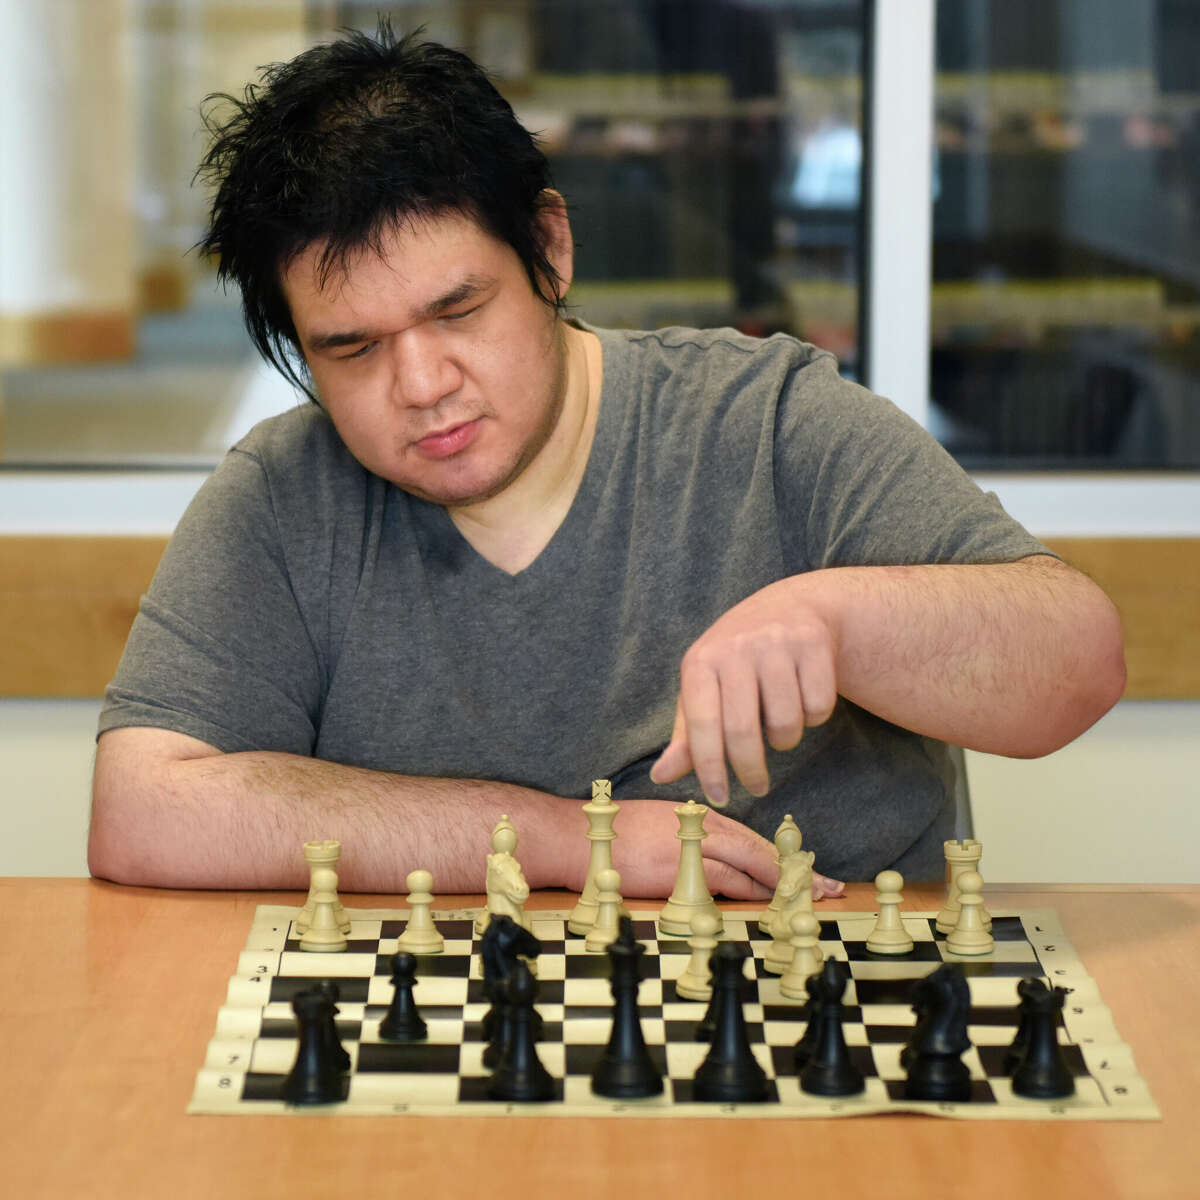 Glenville resident Zachary Tanenbaum, 22, moves a chess piece at Greenwich Library in Greenwich, Conn. Monday, Dec. 5, 2022. Tanenbaum, a graduate of Greenwich High School, is an acclaimed chess player and recently won the Connecticut State Chess Association 2022 Player of the Year award.